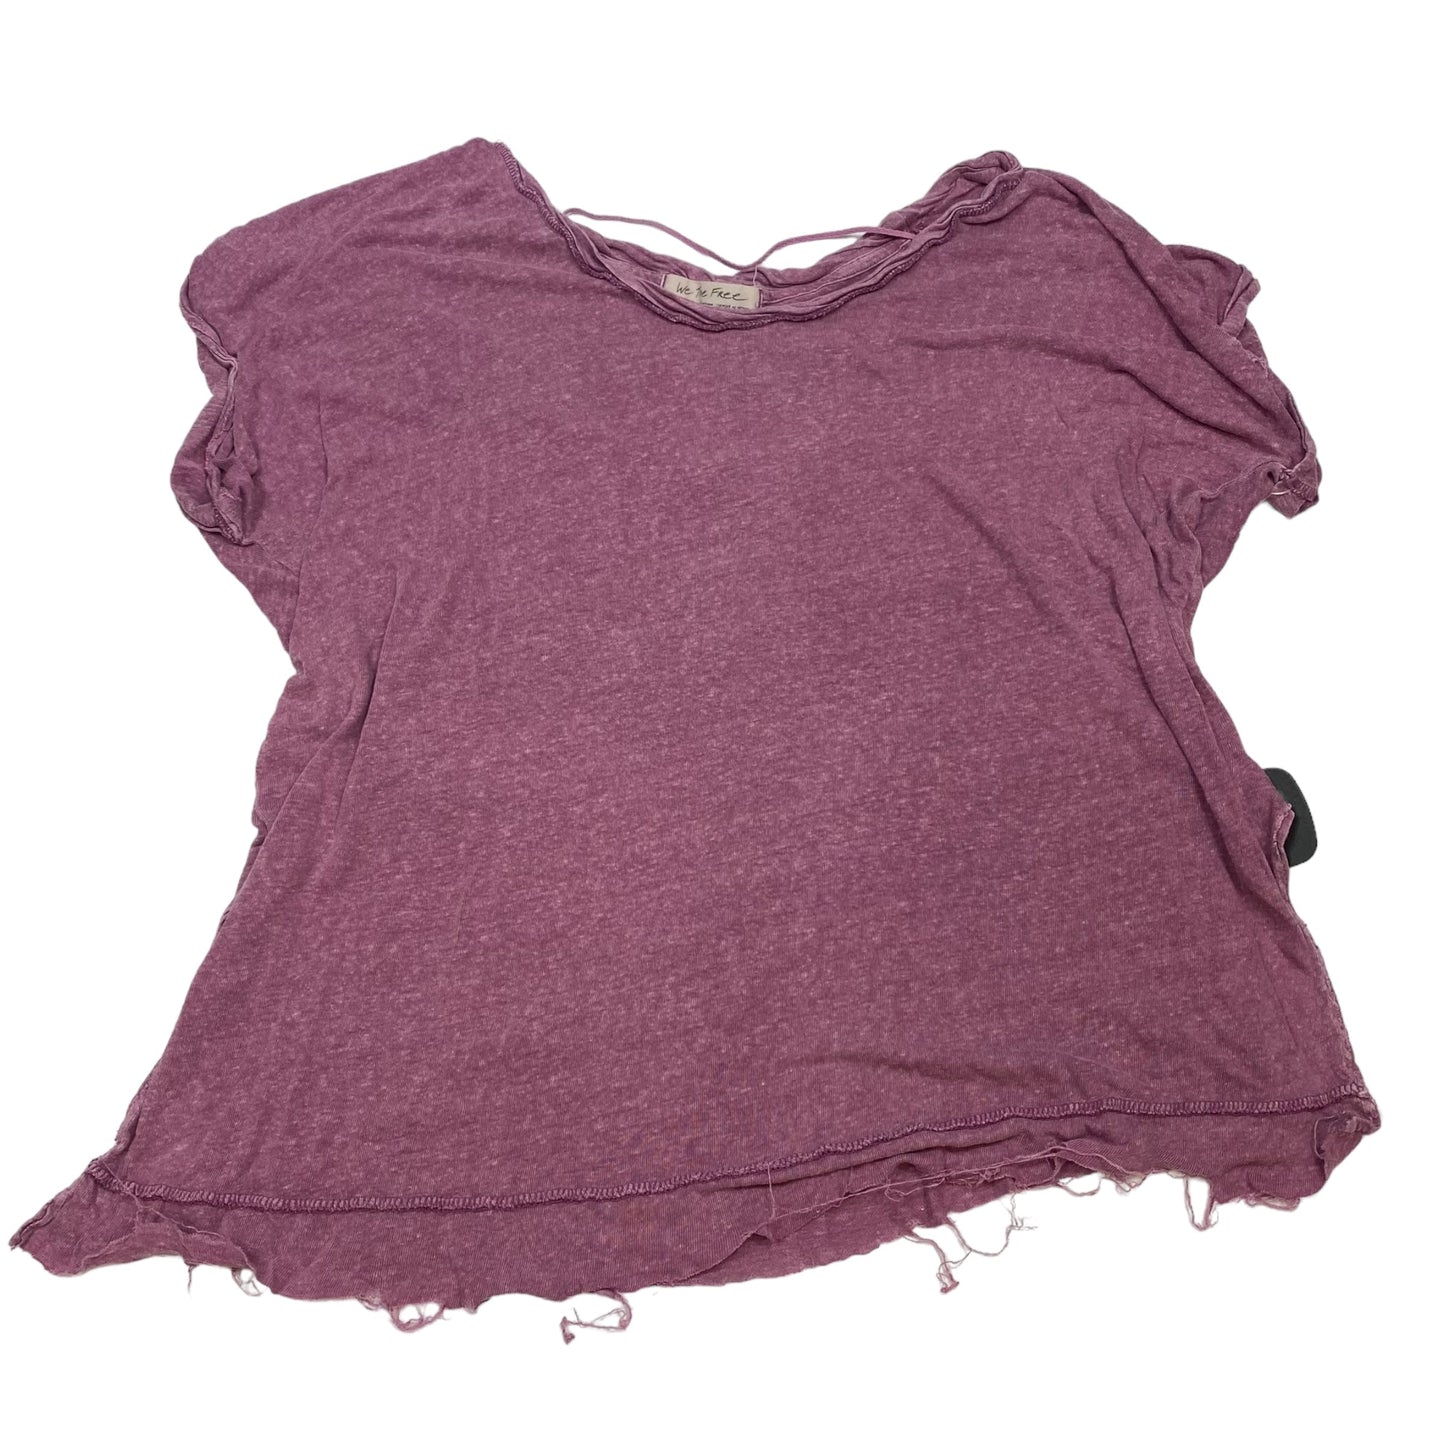 Purple Top Short Sleeve We The Free, Size Xs